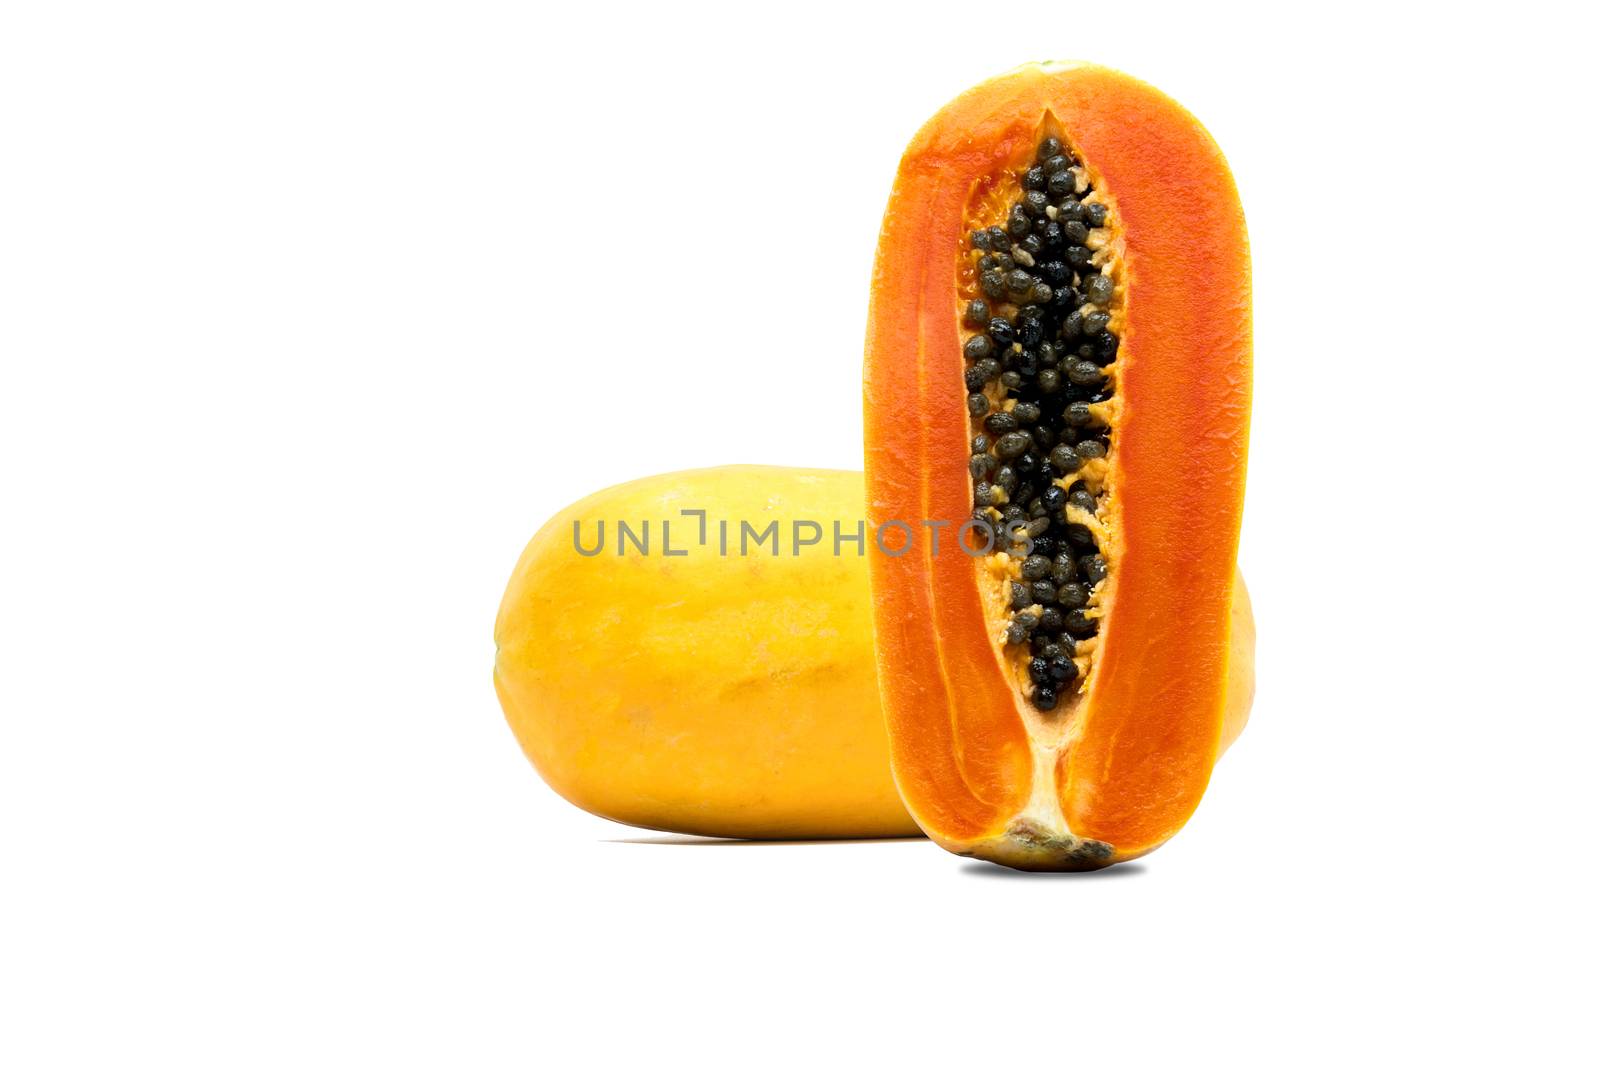 Whole and half of ripe papaya fruit with seeds isolated on white background with copy space. Natural source of vitamin C, folate and minerals. Healthy food for pregnant and breast feeding woman by Fahroni